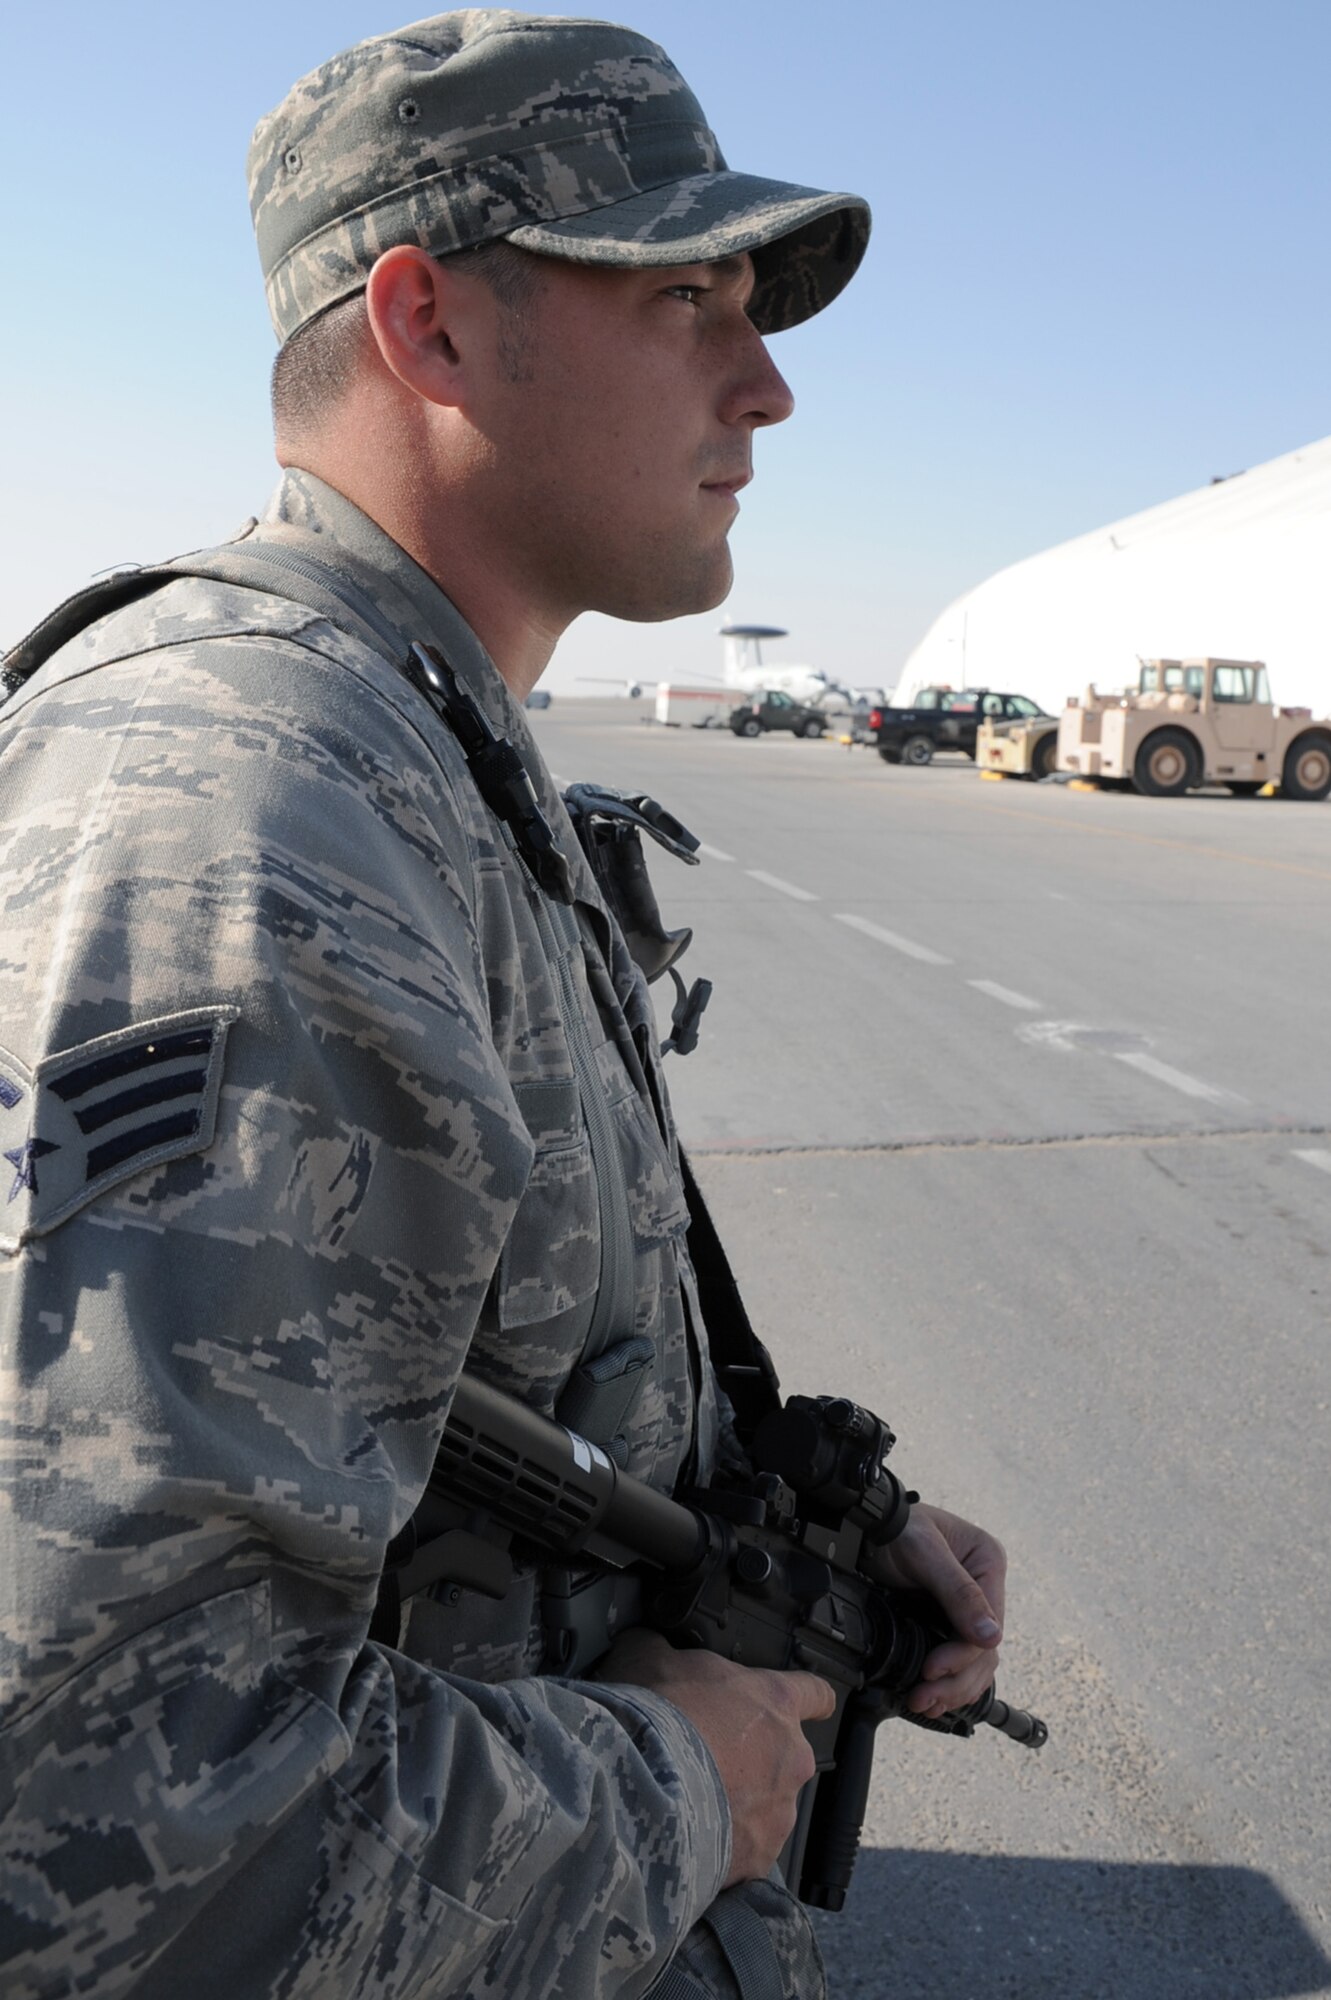 Senior Airman James Assett, security forces journeyman with the 380th Expeditionary Security Forces Squadron at a non-disclosed base in Southwest Asia, watches over a checkpoint during operations near the flightline Jan. 22, 2010.  Airman Asseff is deployed from the 96th Security Forces Squadron at Eglin Air Force Base, Fla., and his hometown is Lorain, Ohio.  (U.S. Air Force Photo/Tech. Sgt. Scott T. Sturkol/Released)